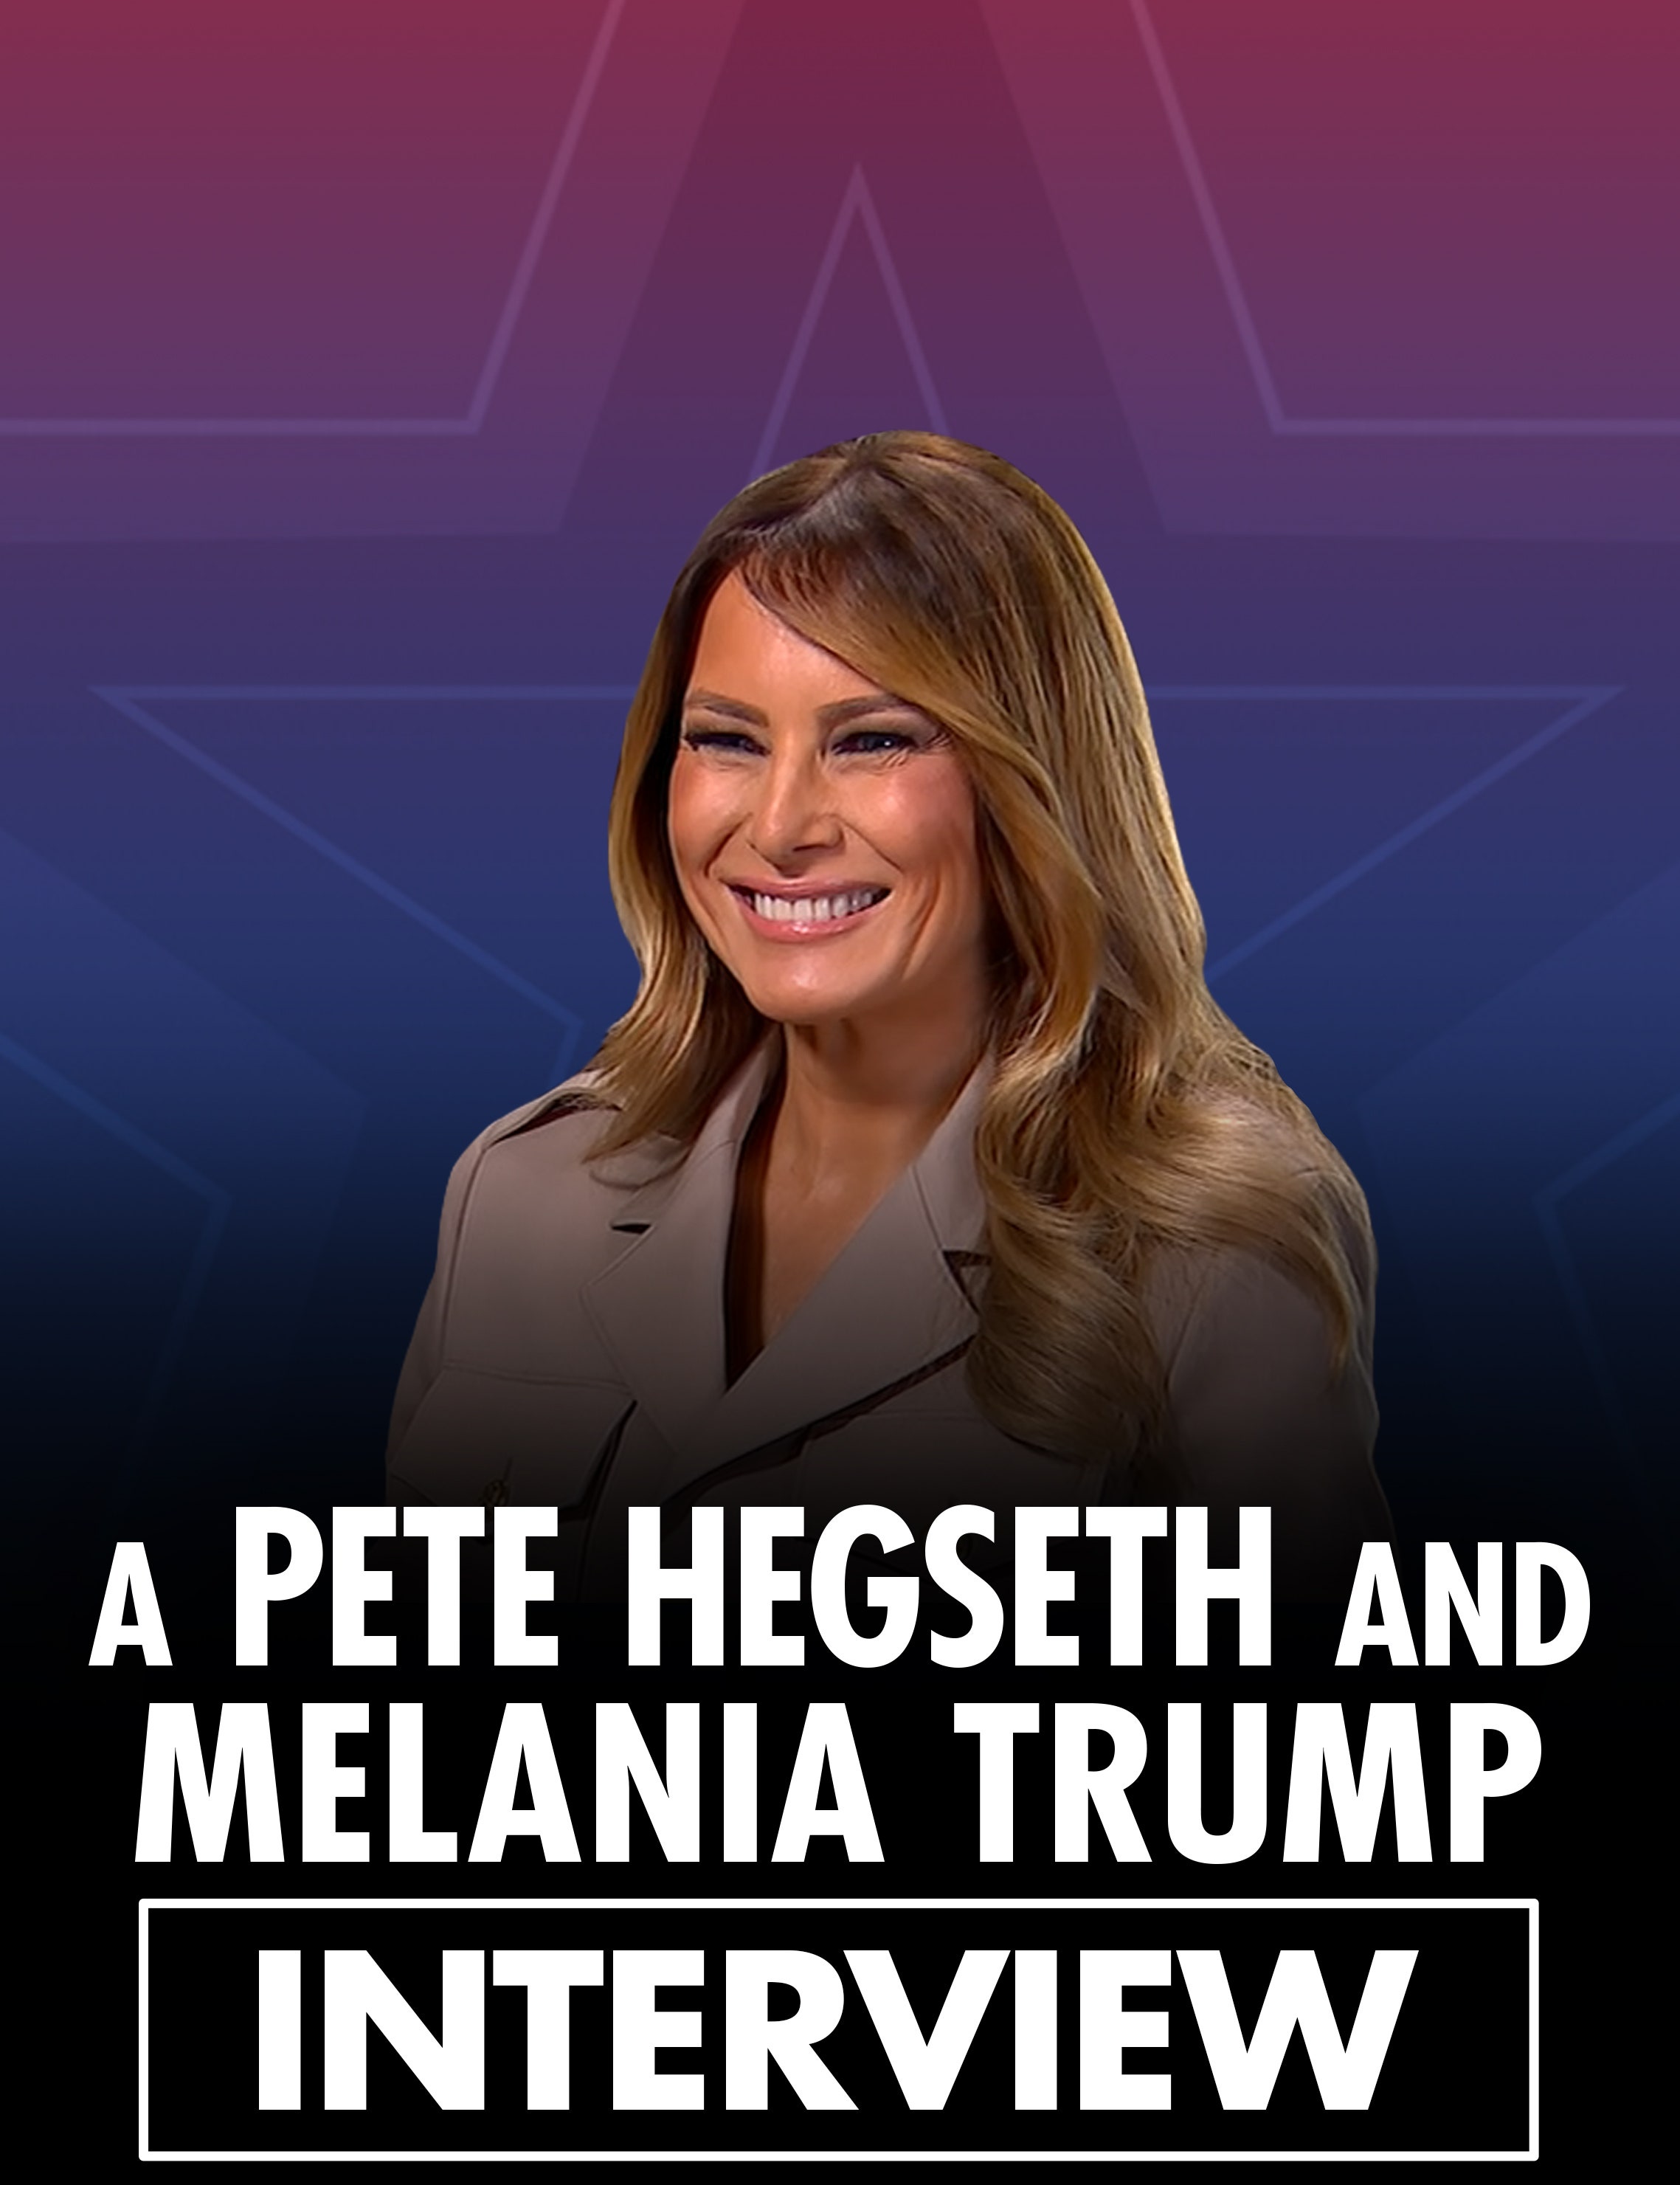 A Pete Hegseth and Former First Lady Melania Trump Interview dcg-mark-poster